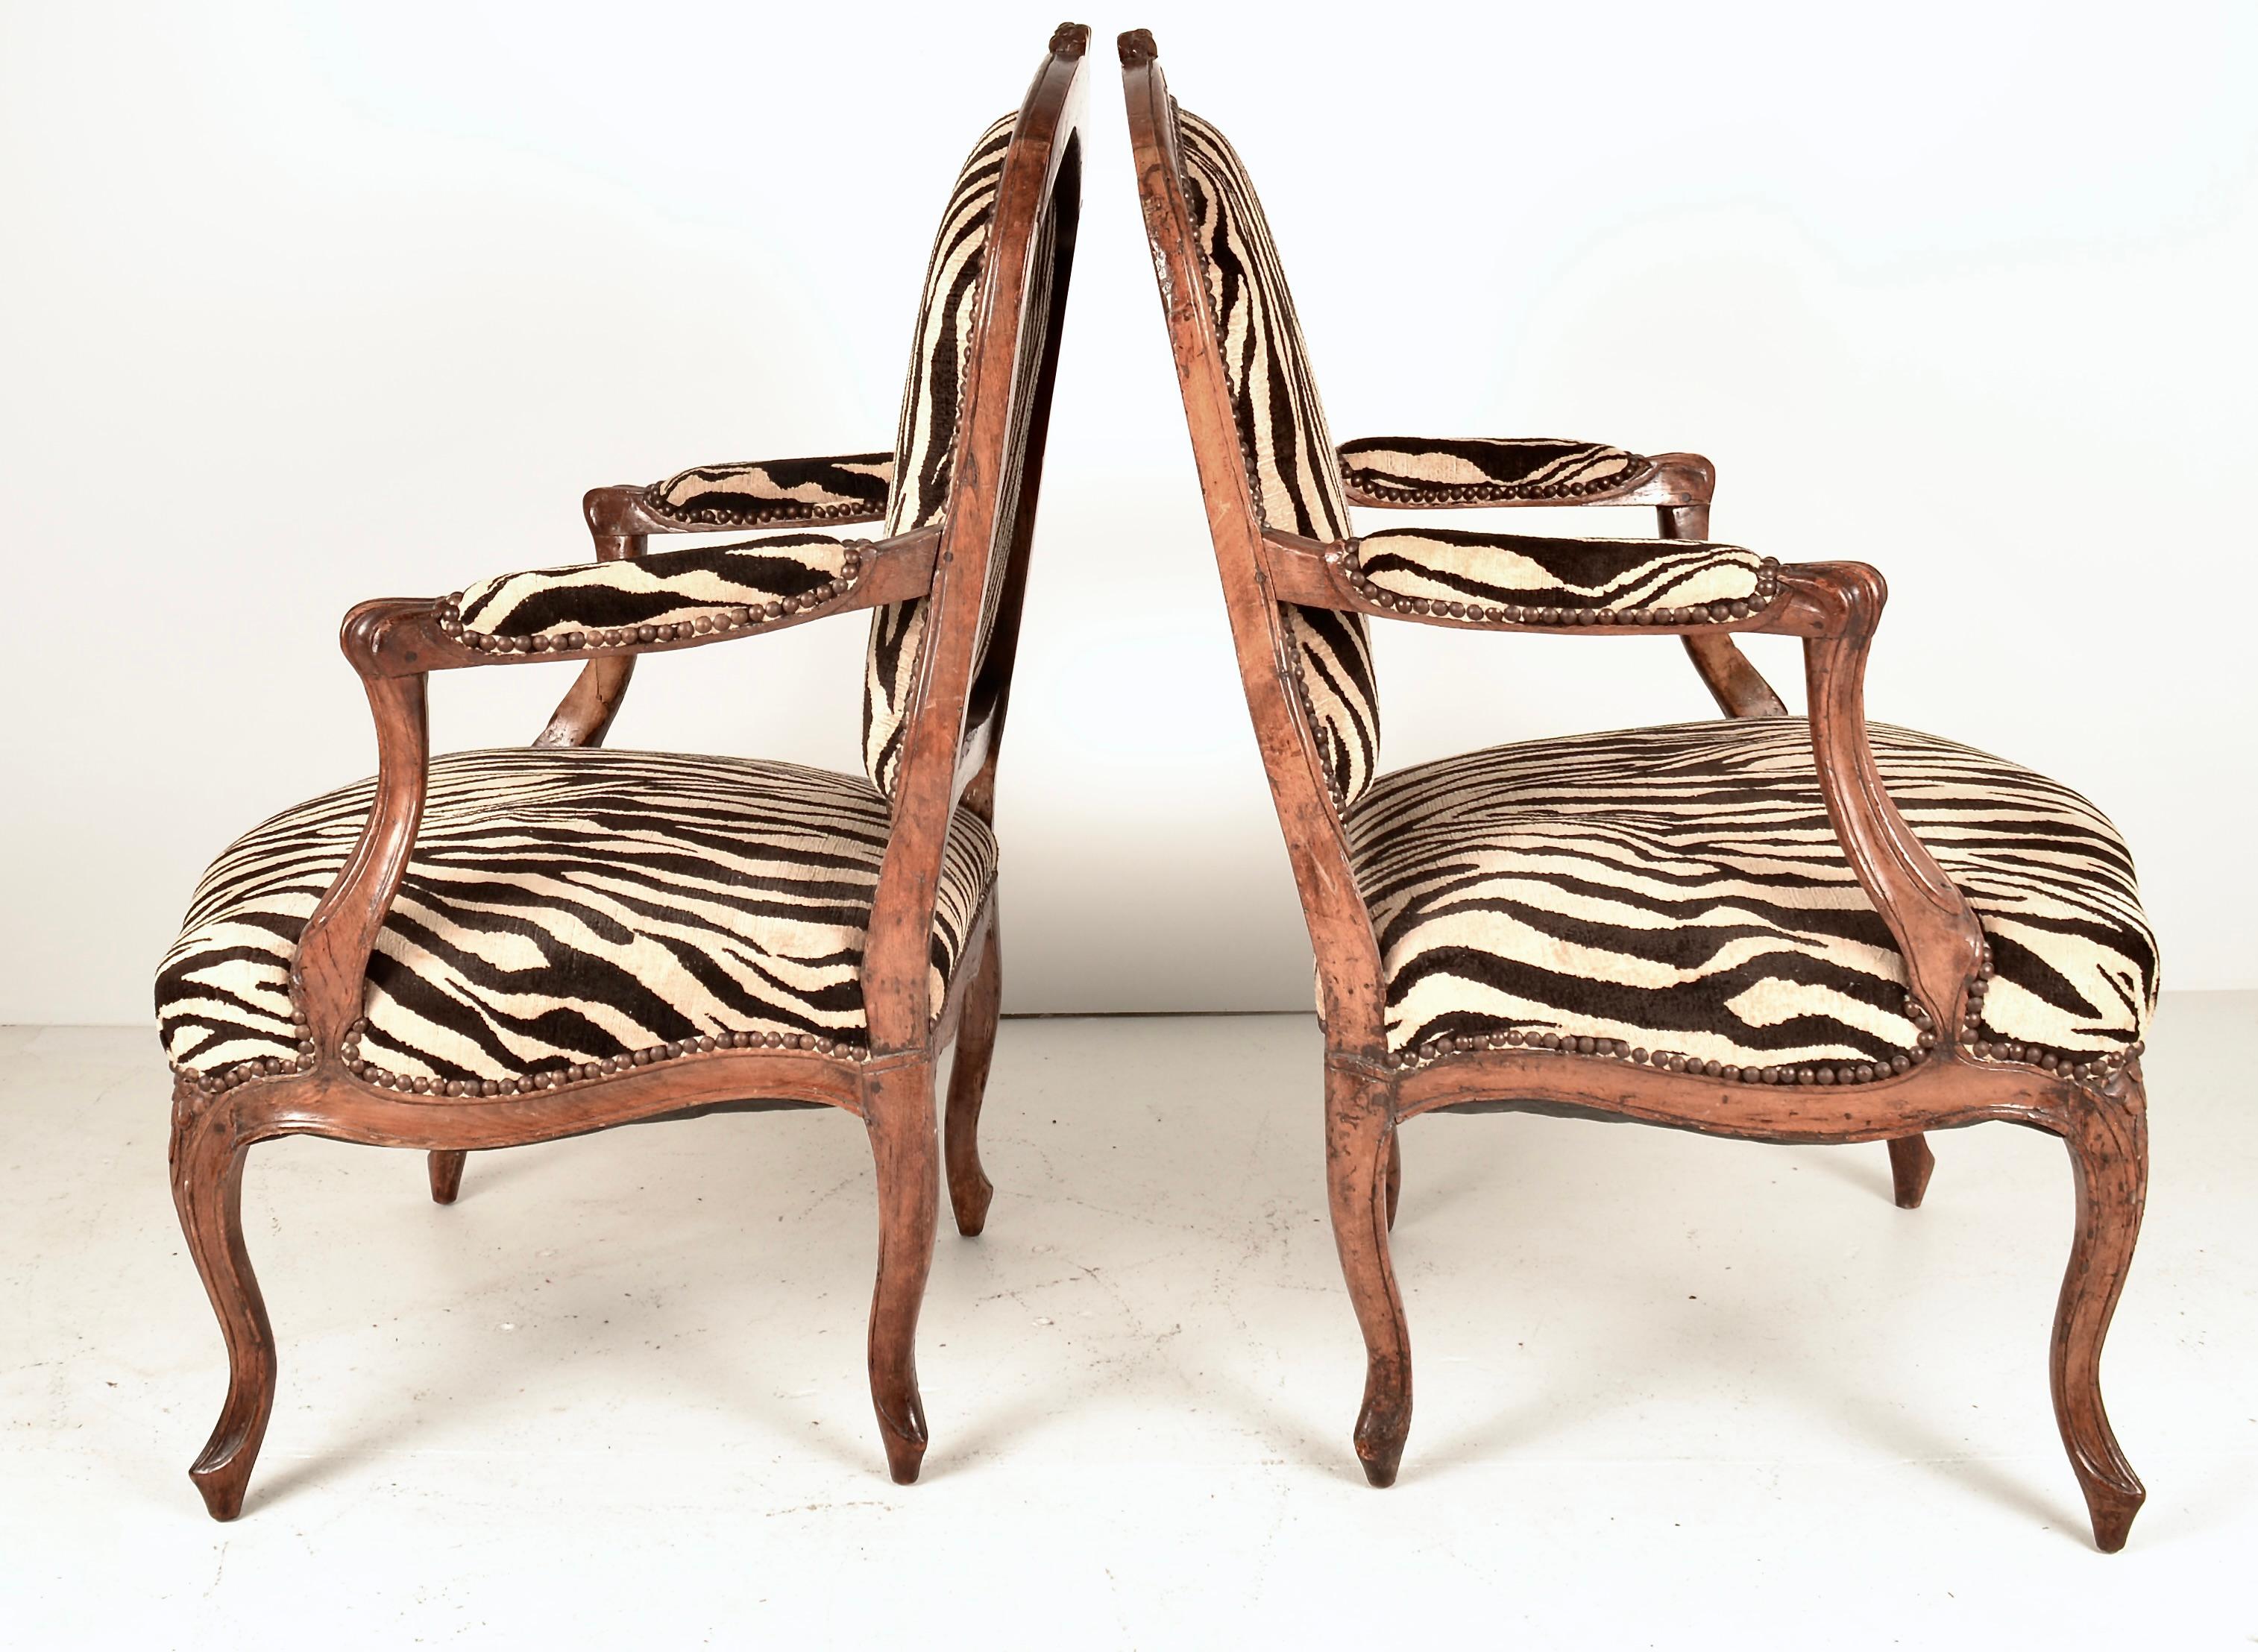 A handsome pair of French open arm chairs. Lovely patina on hand-carved fruitwood frames. Newly upholstered in a quality jacquard velvet in a zebra pattern. Quality, sturdy chairs in very fine condition. 